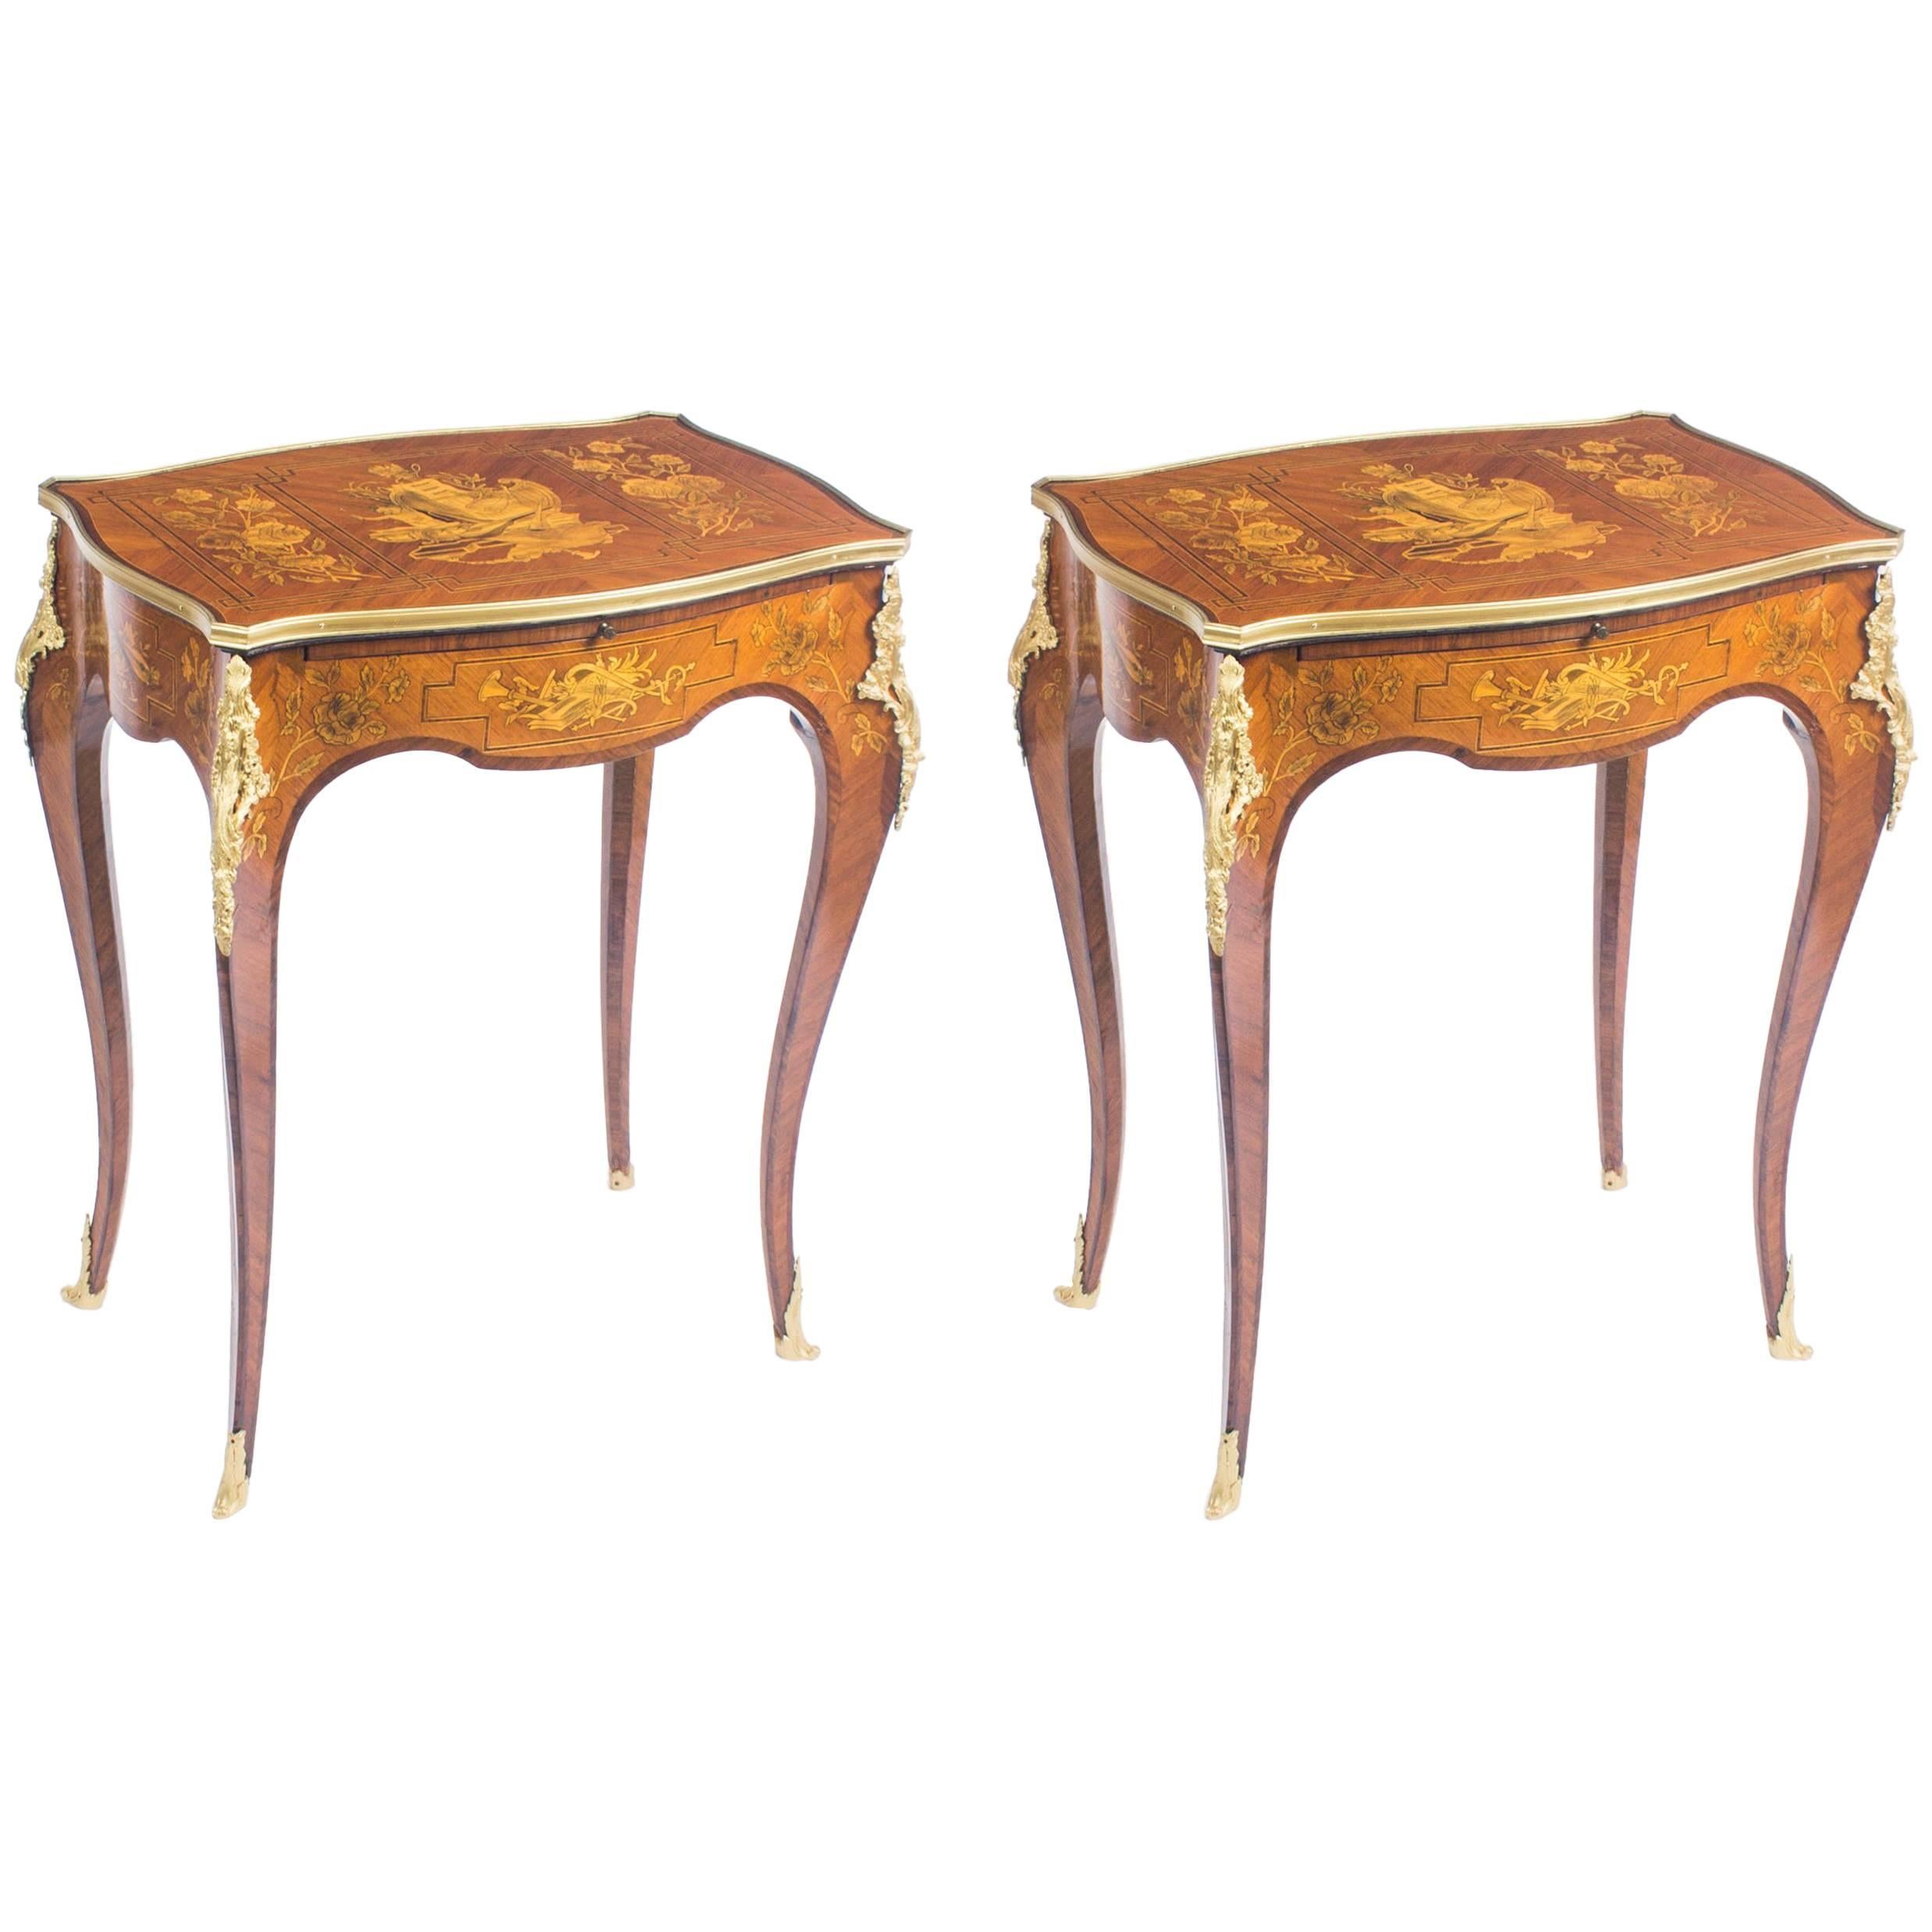 Early 20th Century Pair of Parquetry and Ormolu-Mounted Occasional Tables